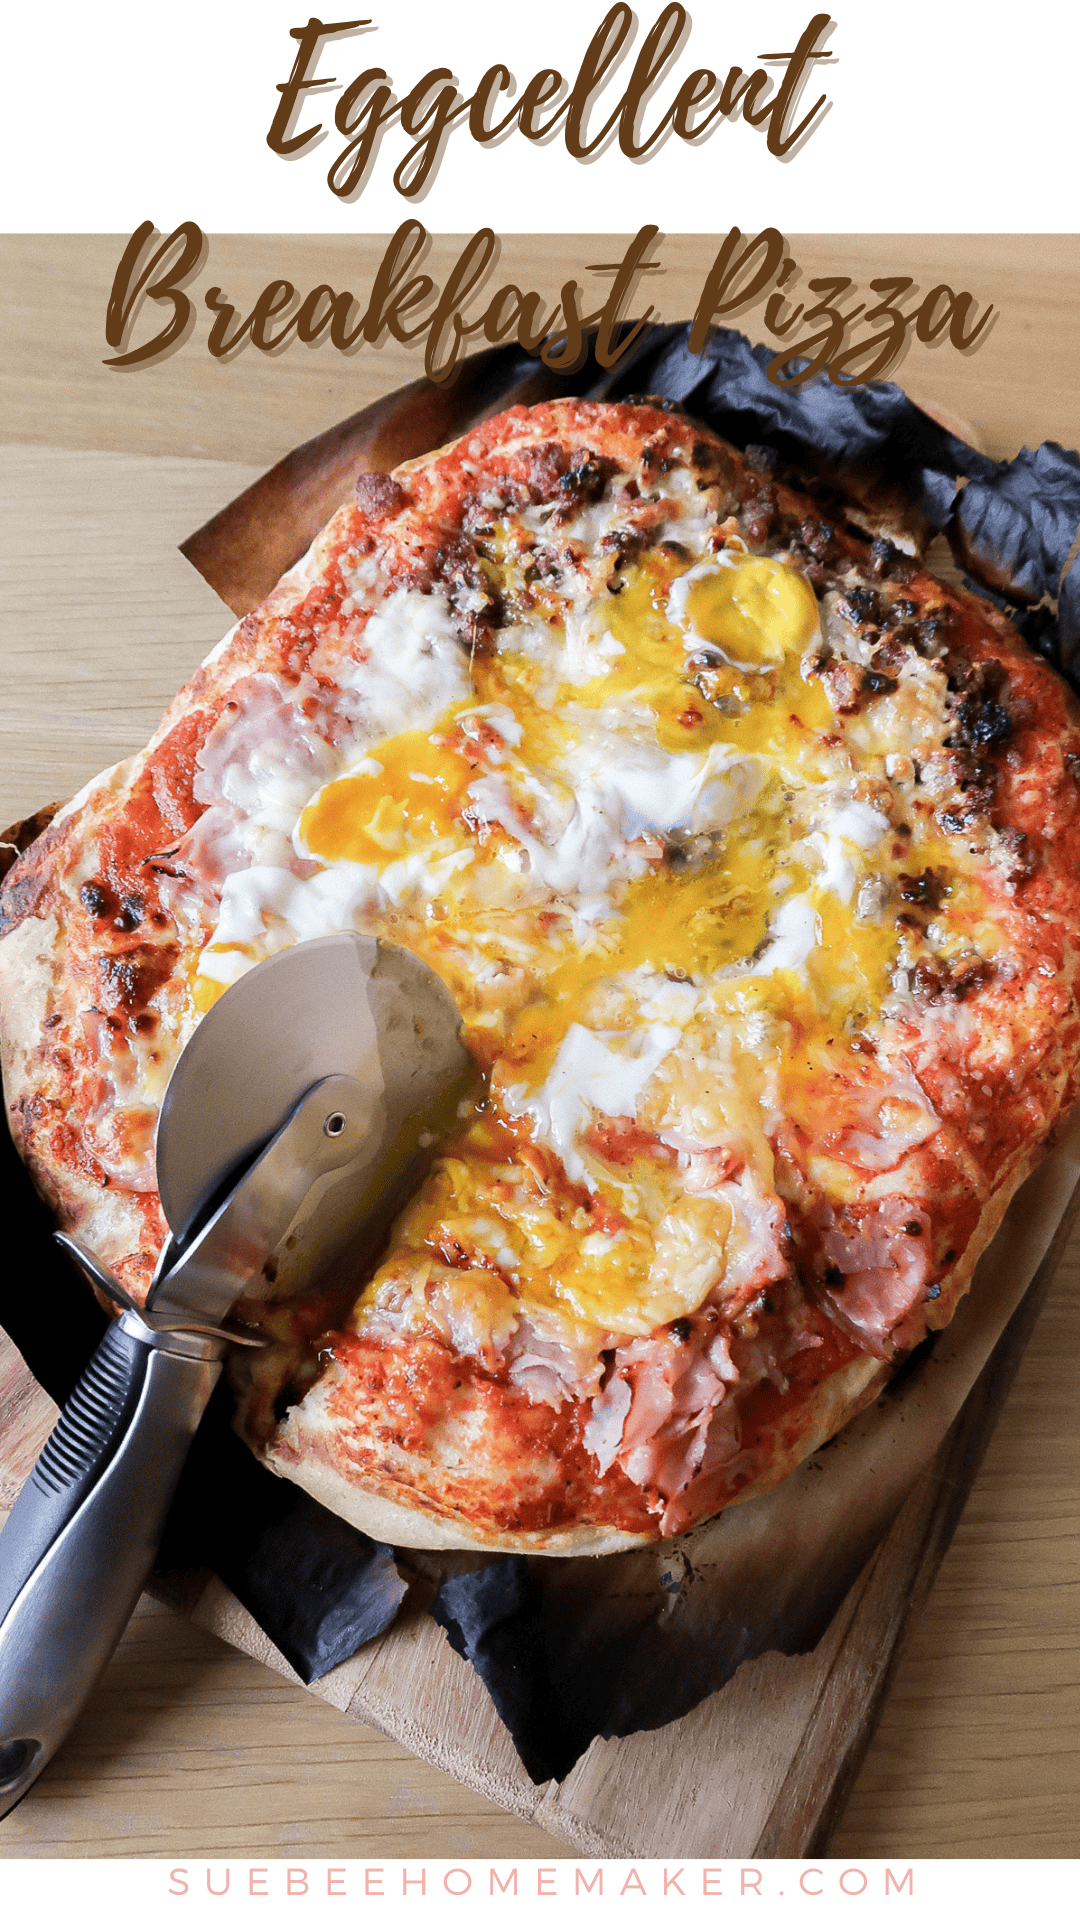 Eggcellent Breakfast Pizza- overhead photo of cooked pizza with a pizza cutter.